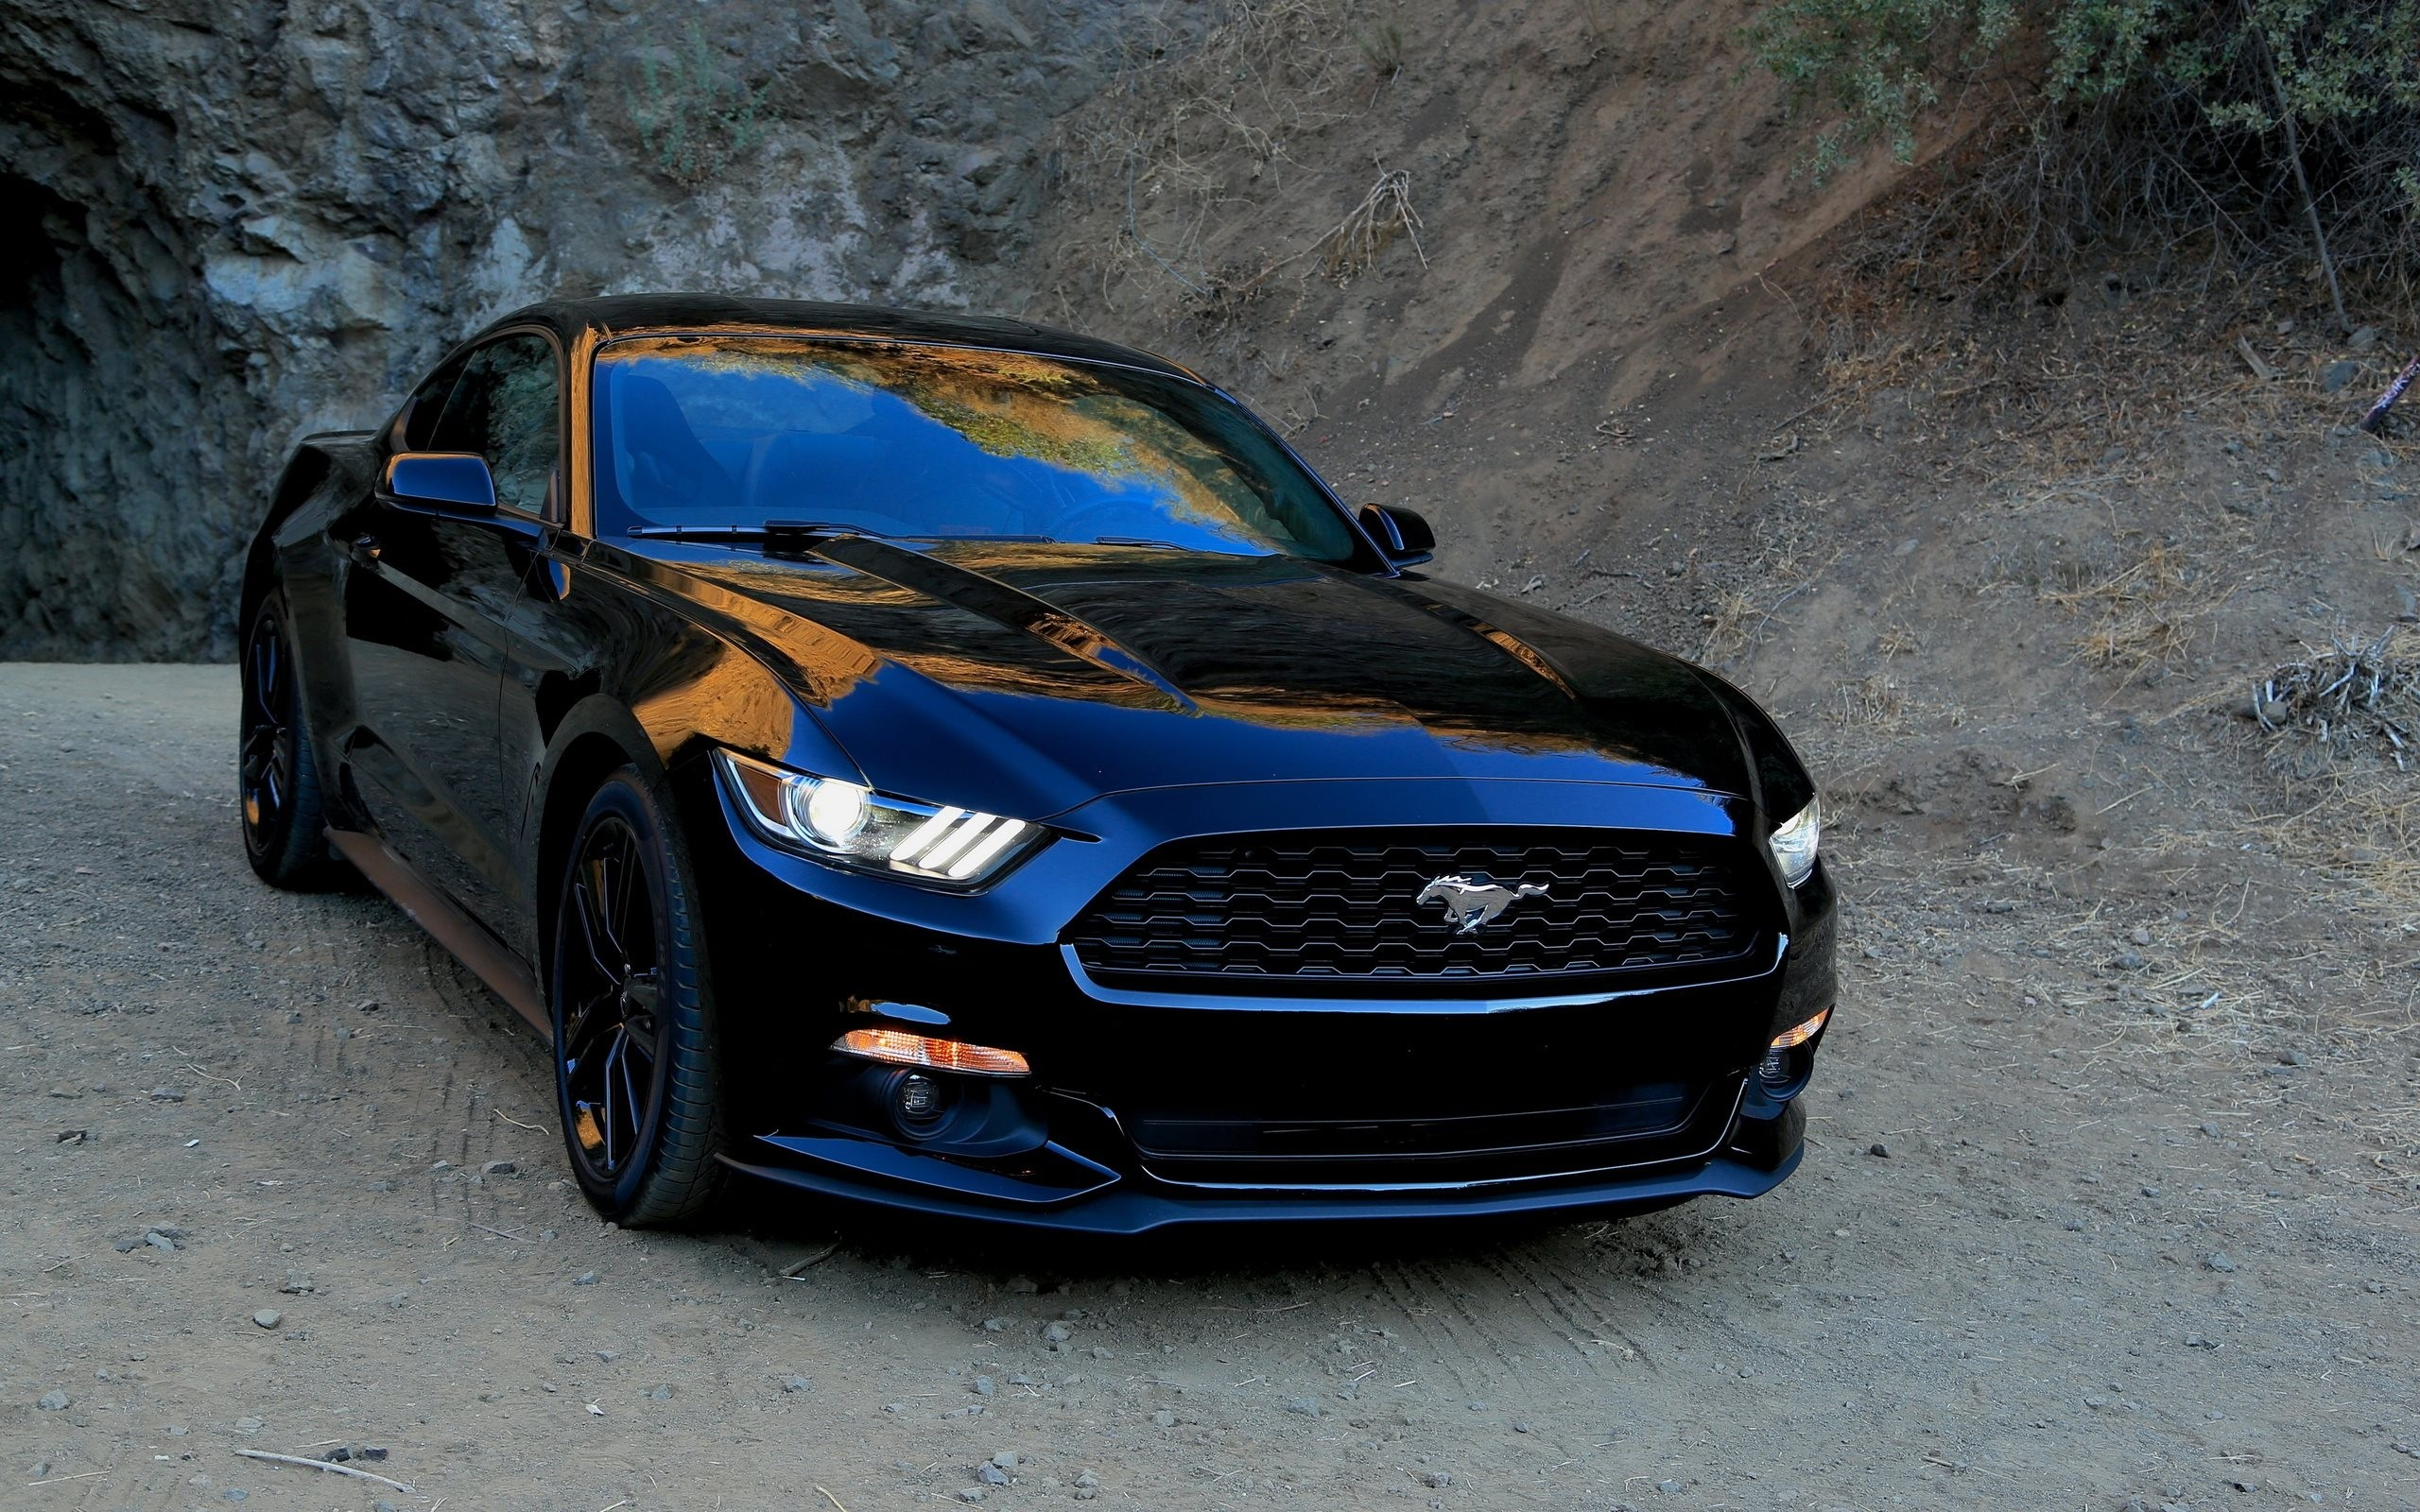 2560x1600 950+ Ford Mustang HD Wallpapers and Backgrounds